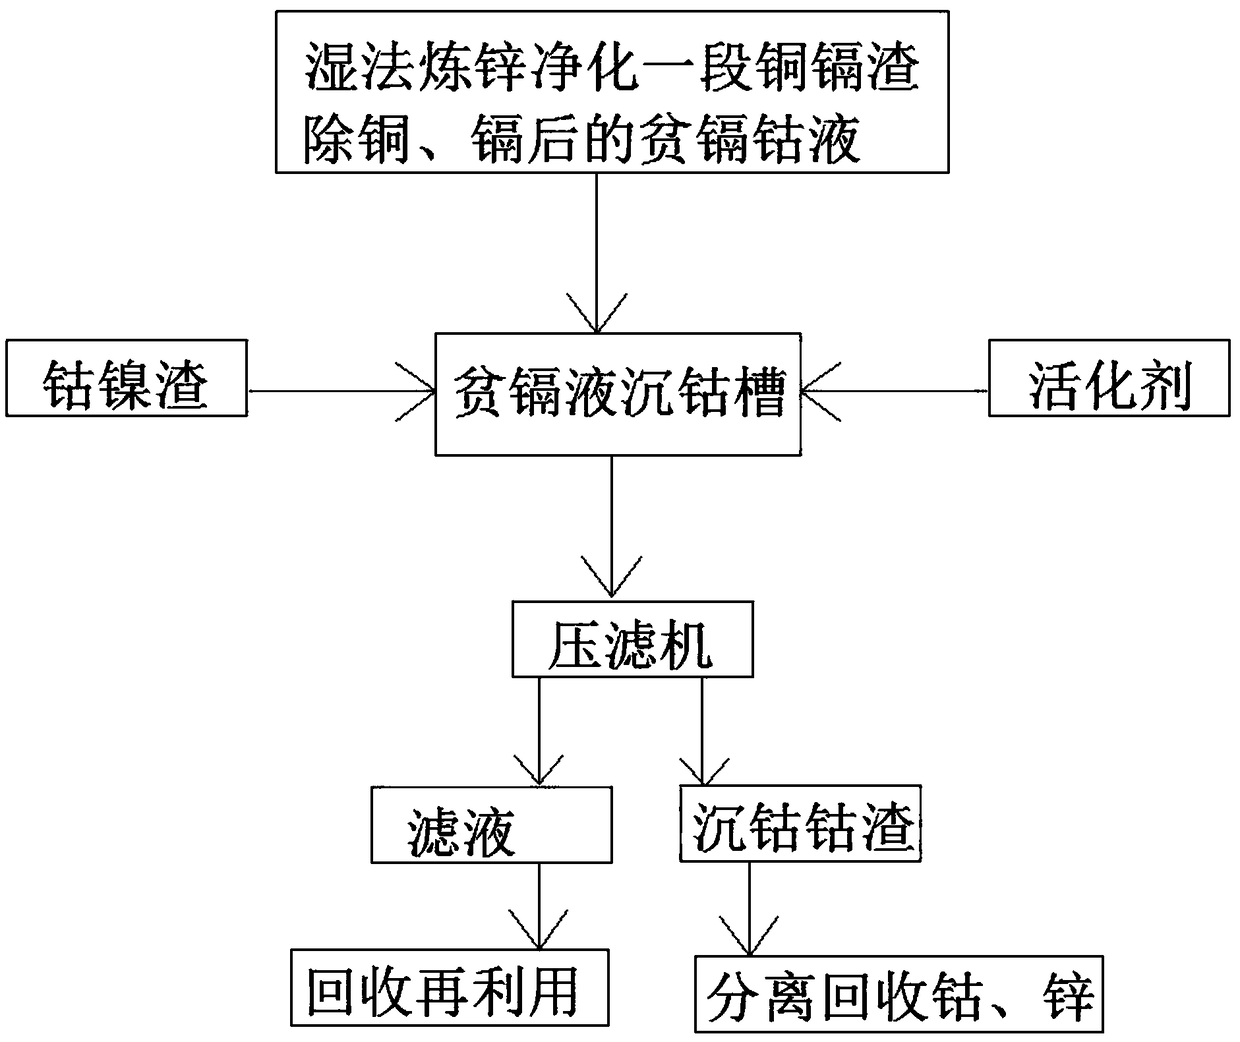 Method for recycling zinc and cobalt in wet-type smelting zinc purifying slag